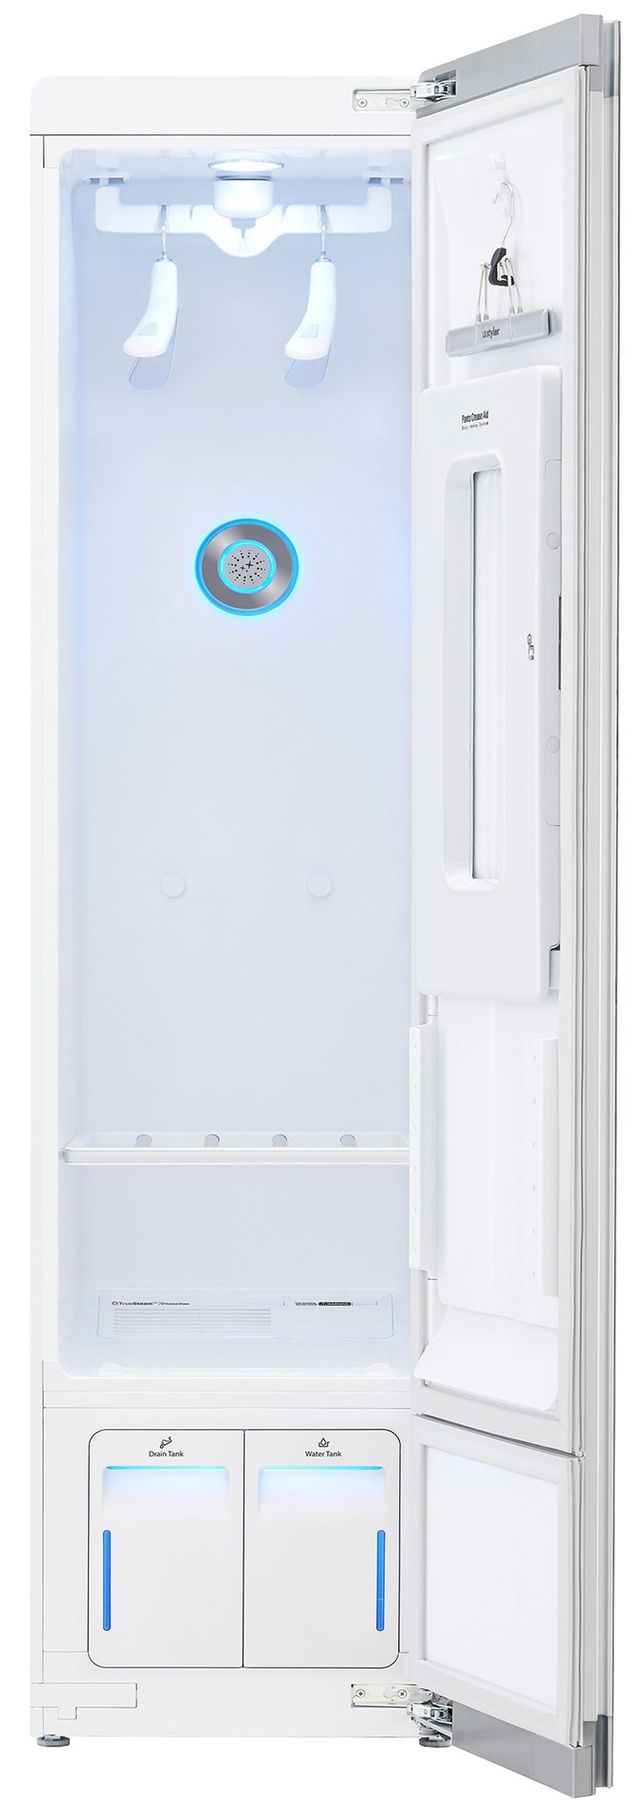 LG Styler® Mirror Smart wi-fi Enabled Steam Closet with TrueSteam® Technology and Exclusive Moving Hangers-2